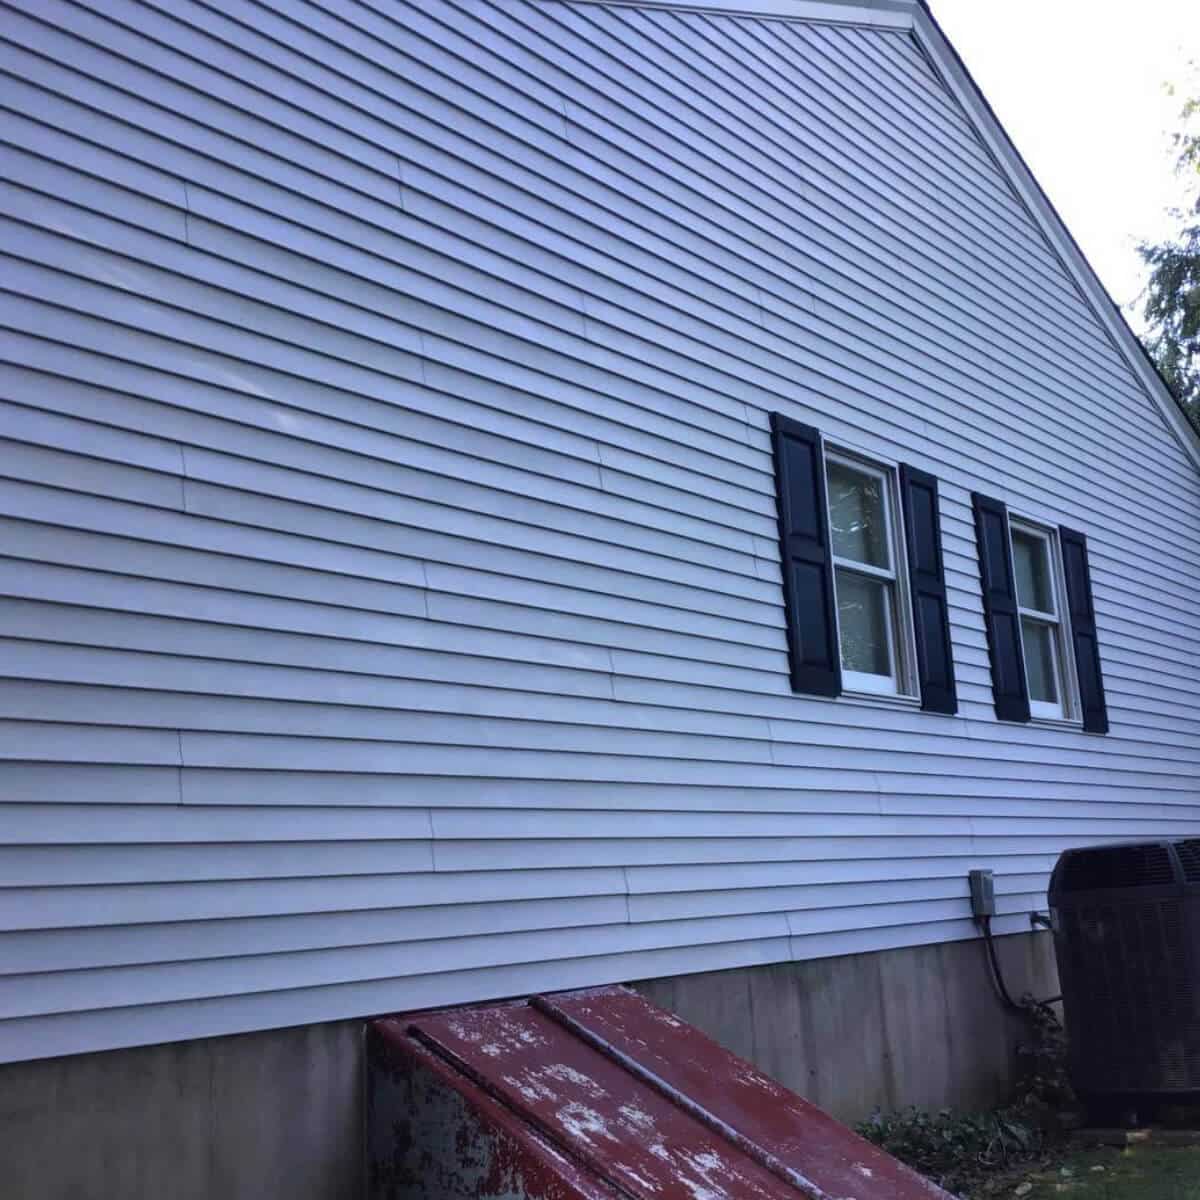 clean house siding after professional house washing in allentown pa